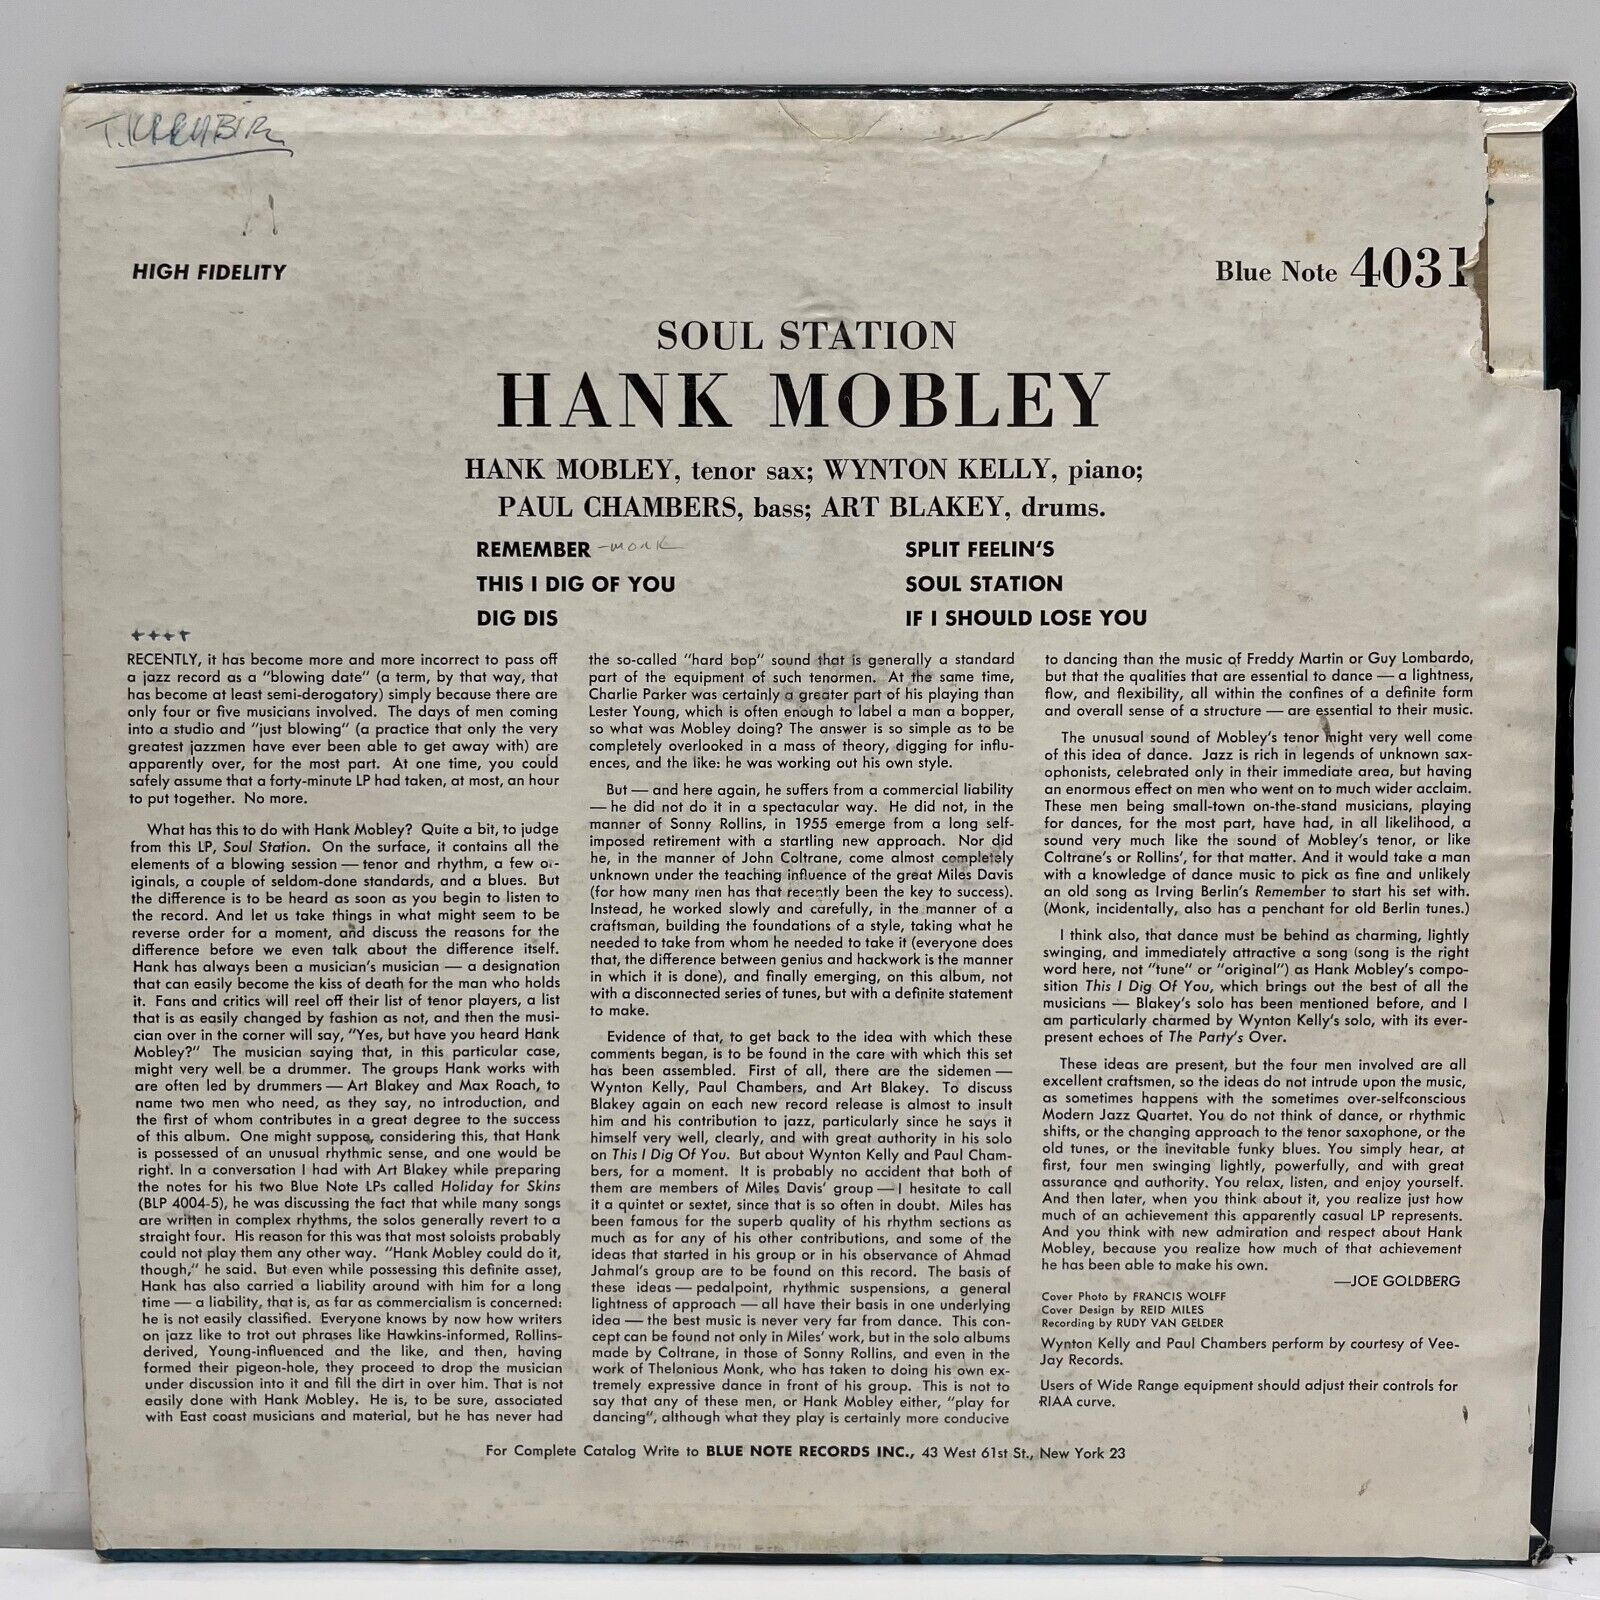 Pic 1 Hank Mobley on Blue Note 4031